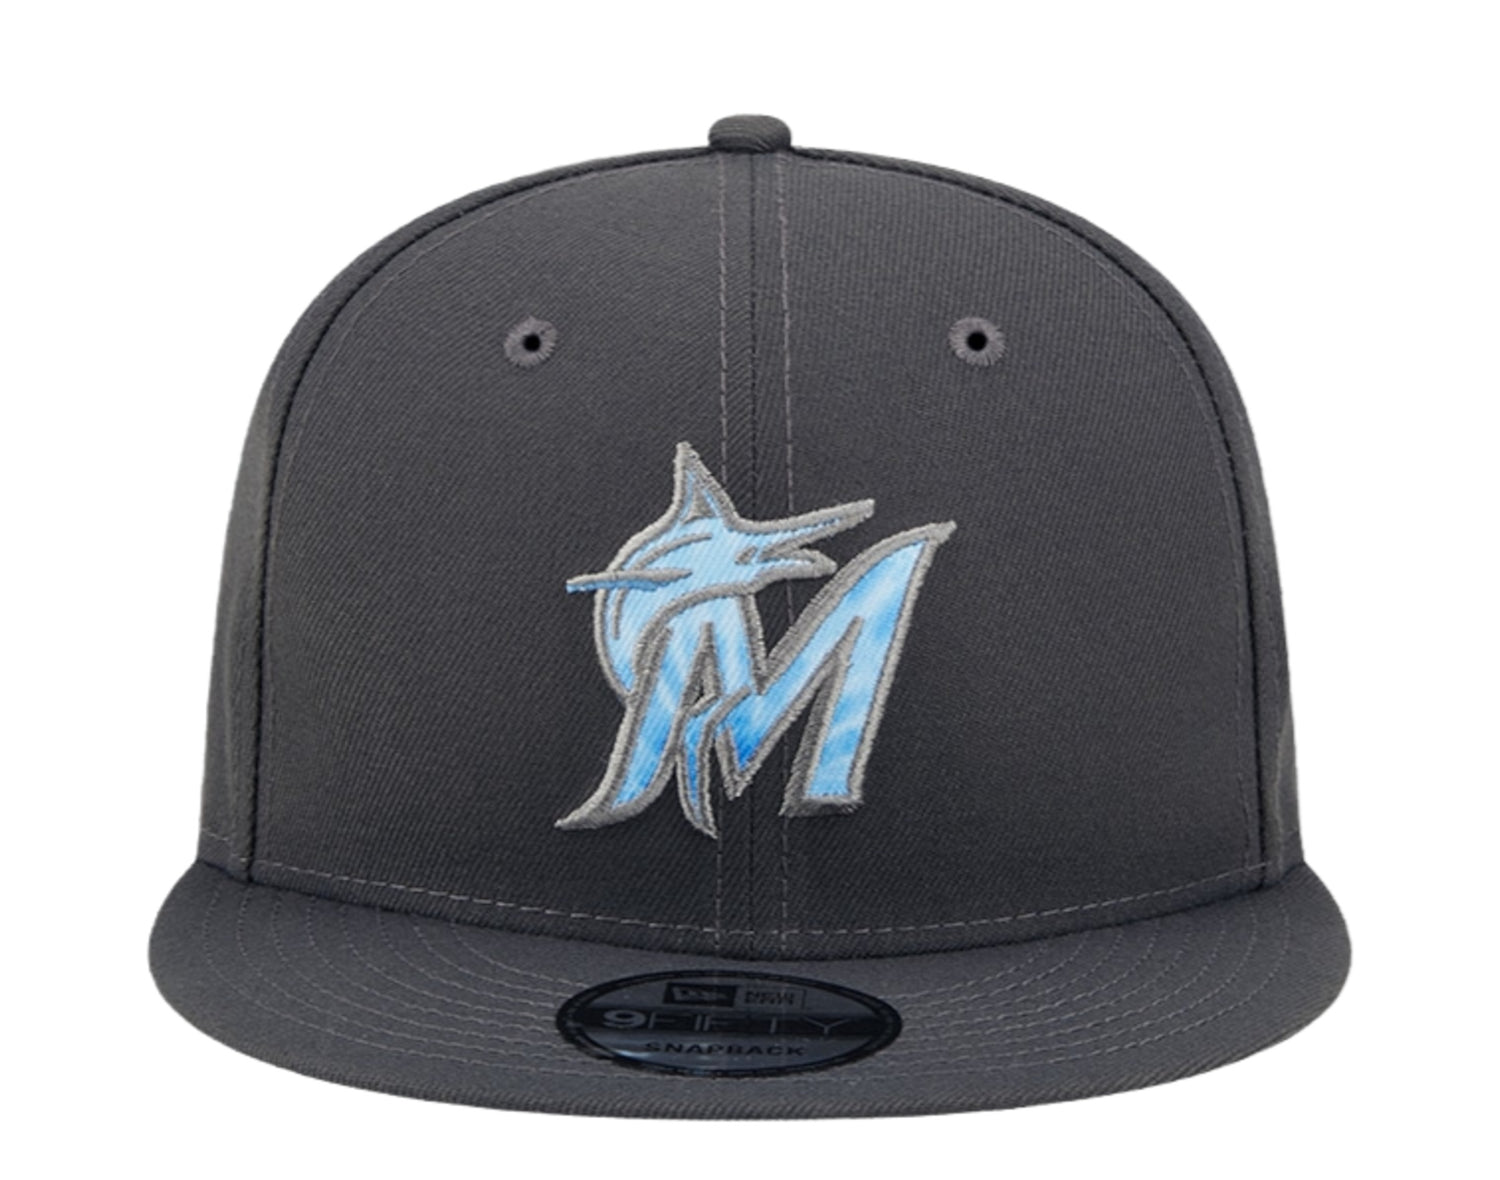 New Era 9Fifty MLB Miami Marlins Father's Day Snapback Hat